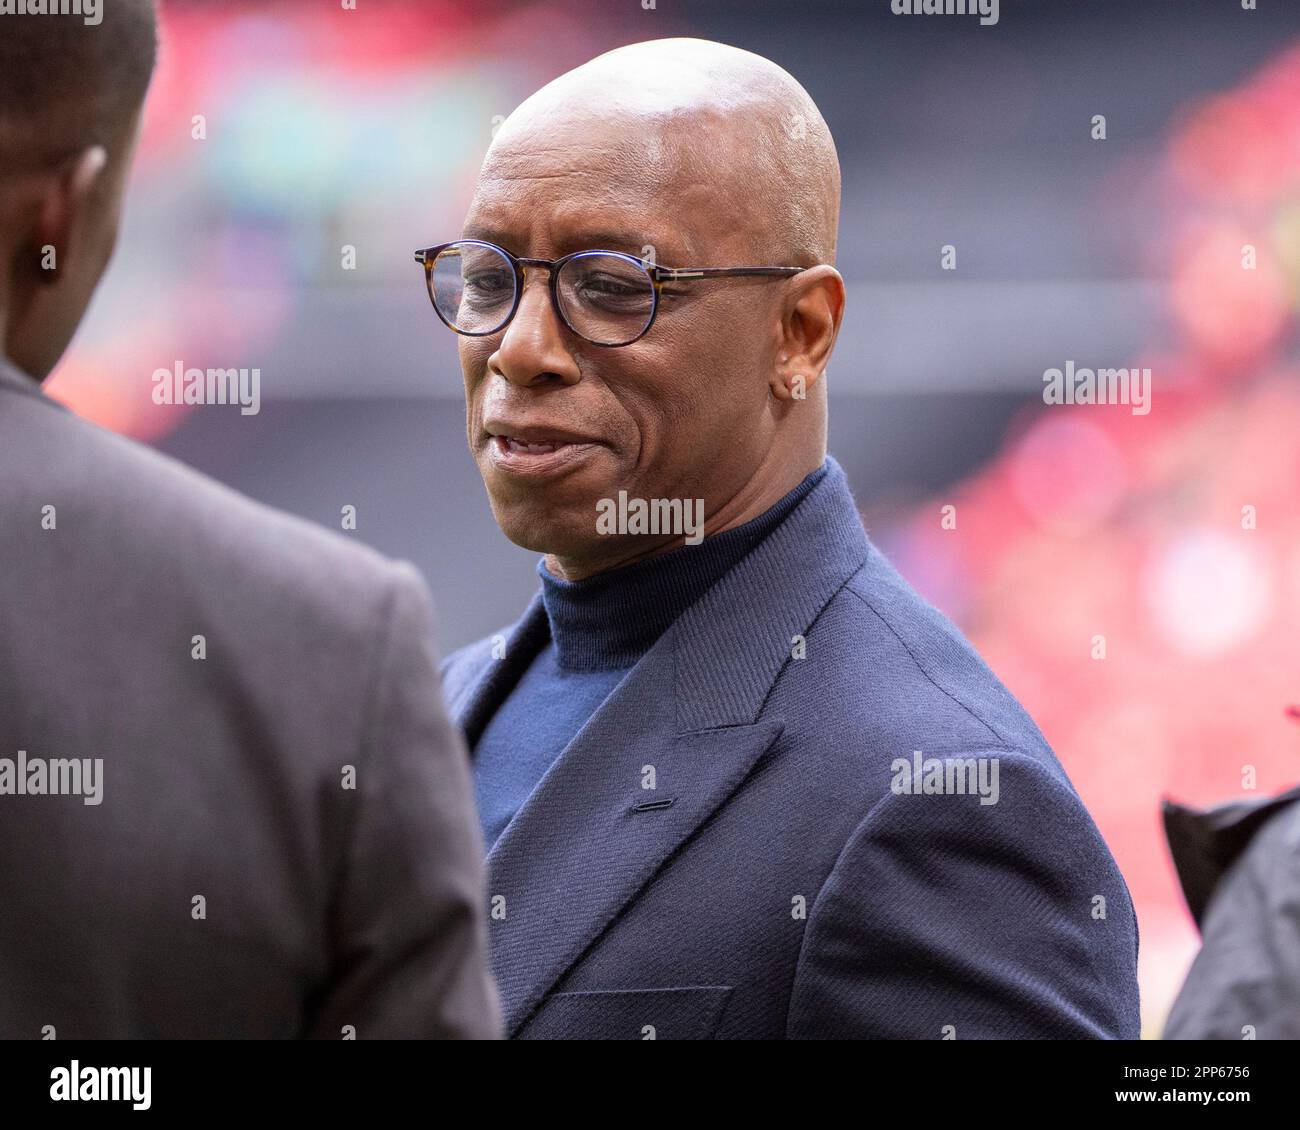 Former Arsenal striker Ian Wright before the FA Cup Semi Final football match between Manchester City and Sheffield United at Wembley Stadium in London, England. (Richard Callis/Sports Press Photo/SPP) Credit: SPP Sport Press Photo. /Alamy Live News Stock Photo